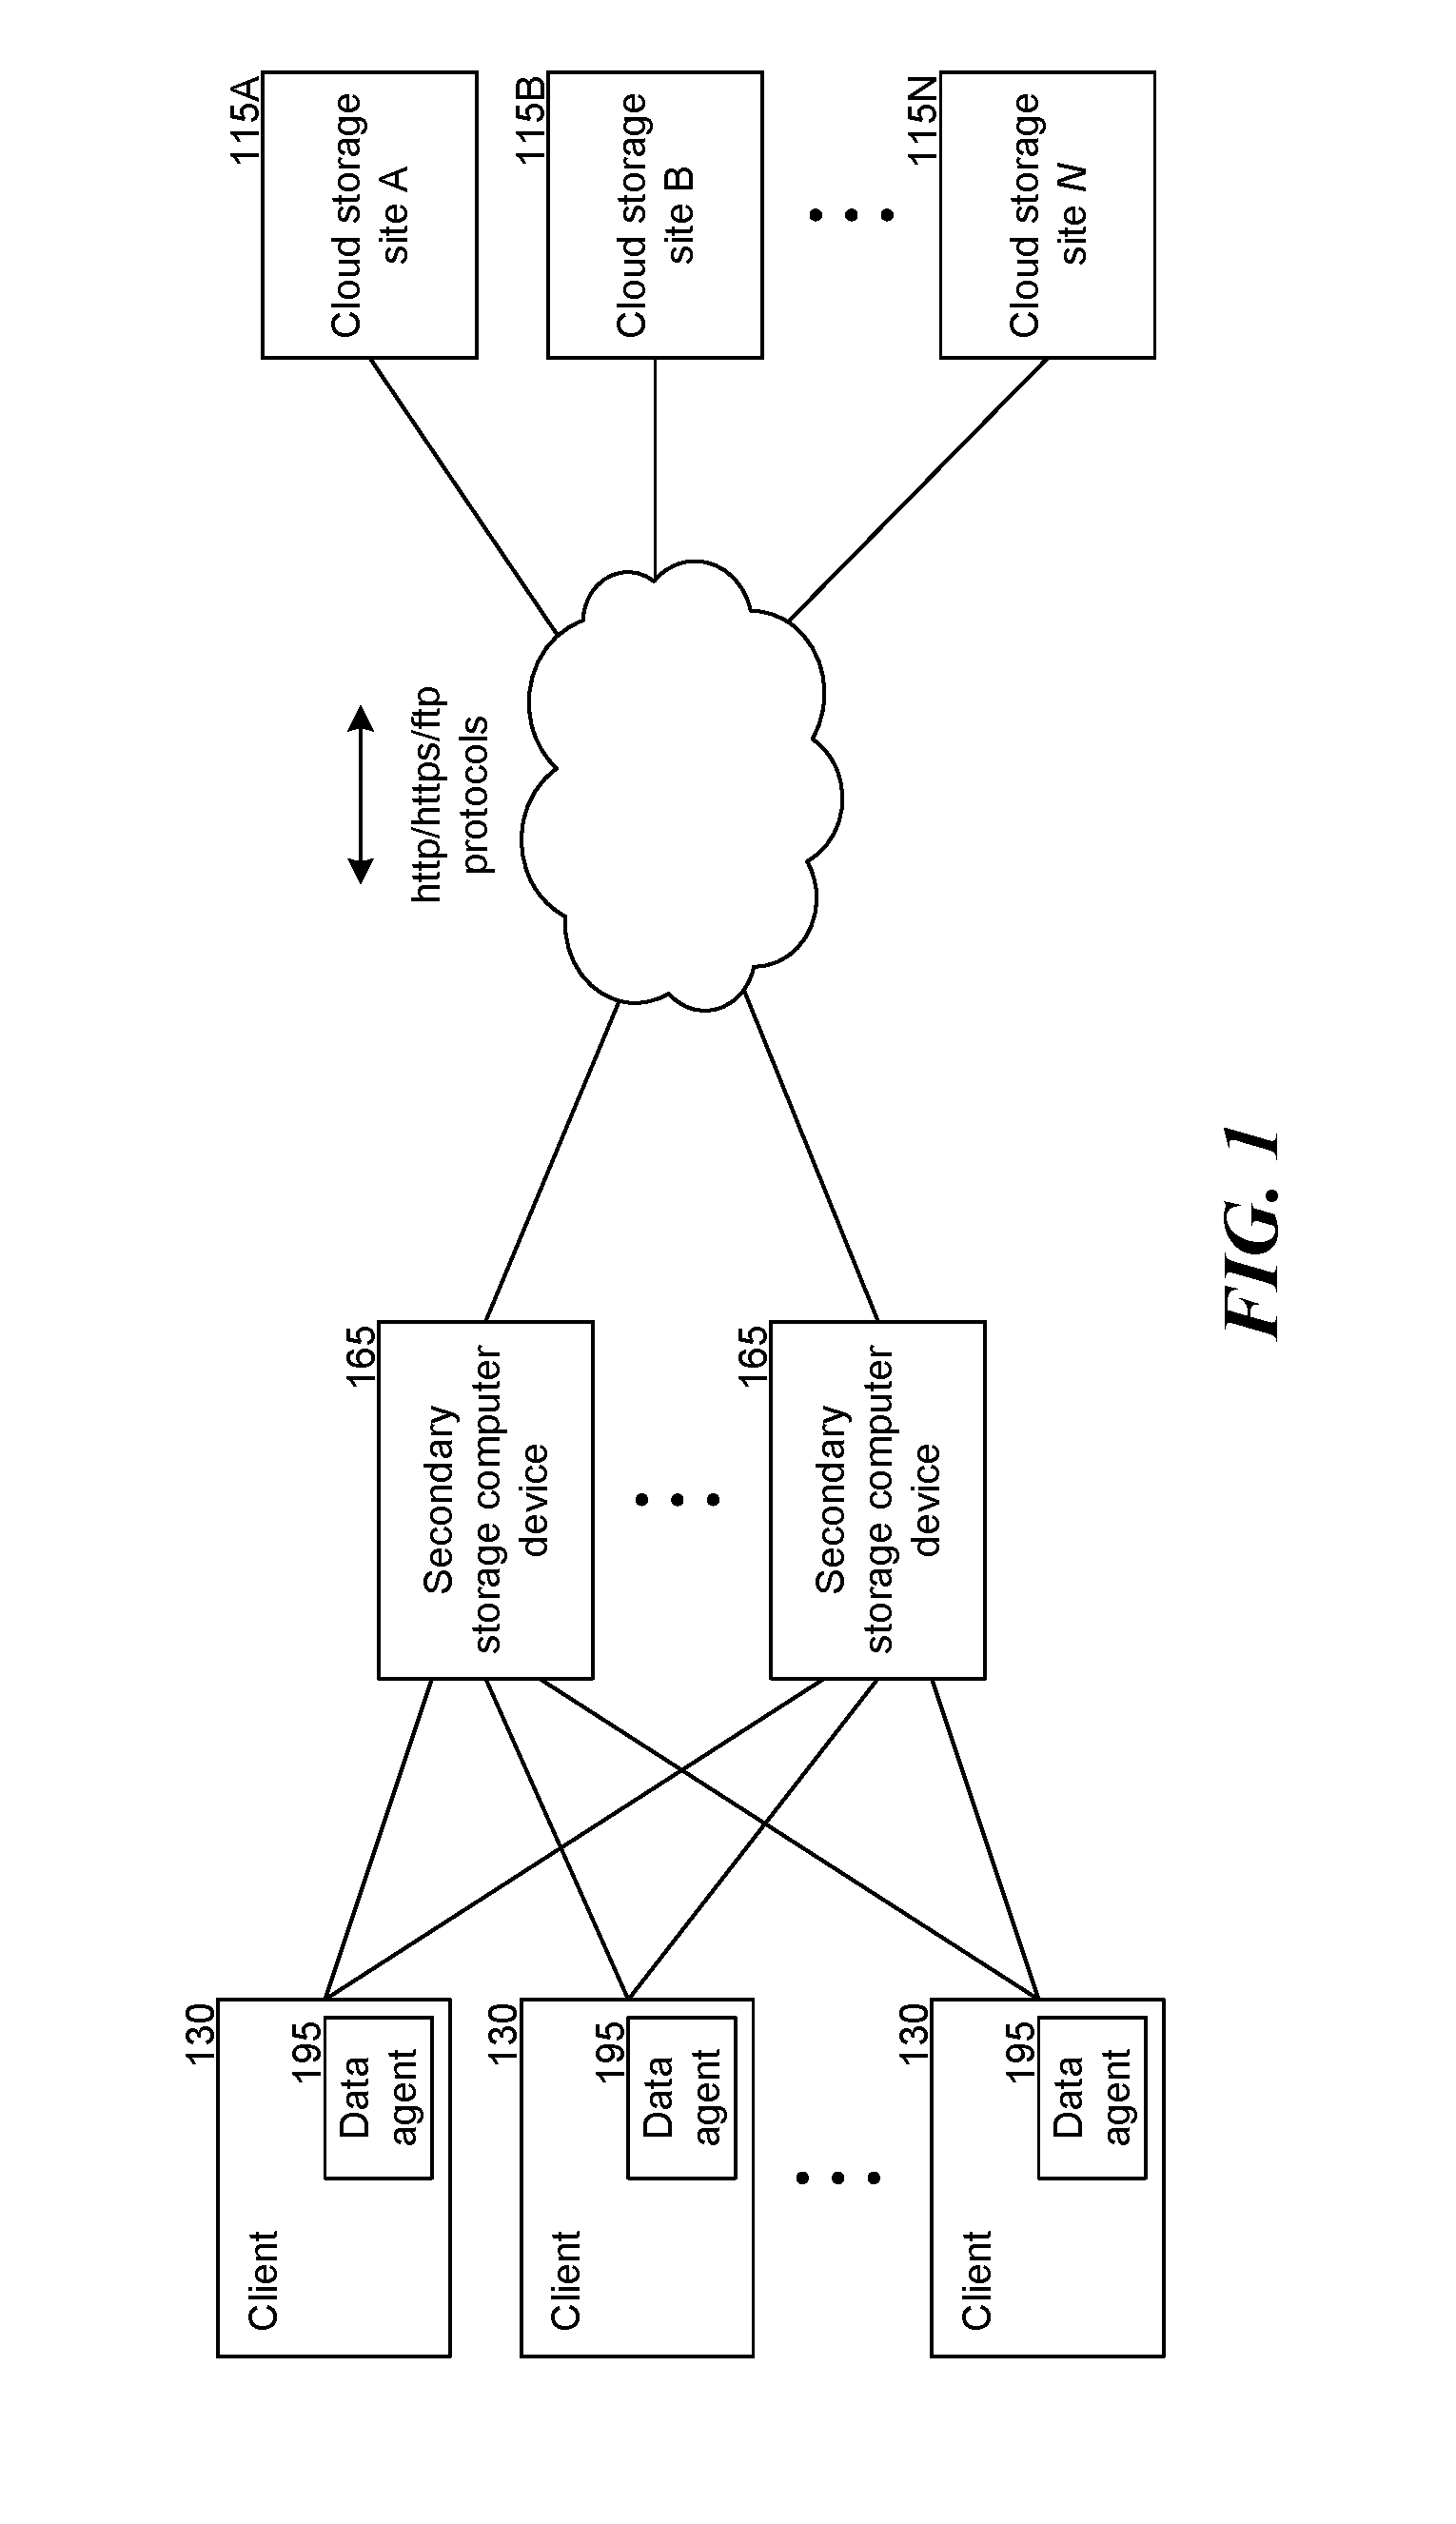 Data object store and server for a cloud storage environment, including data deduplication and data management across multiple cloud storage sites